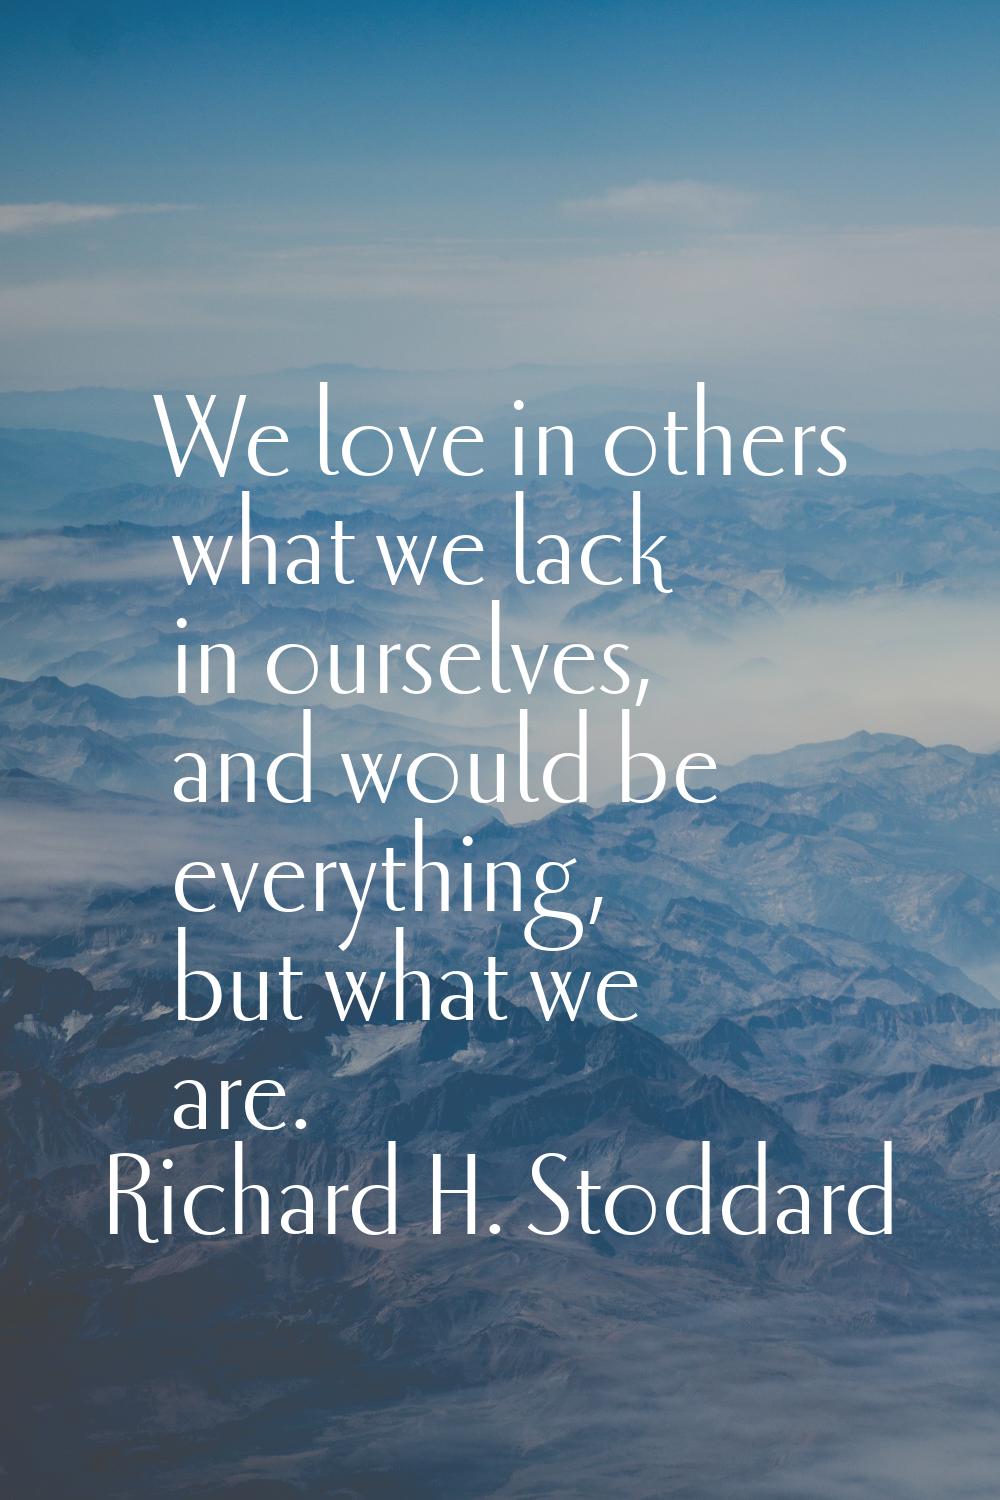 We love in others what we lack in ourselves, and would be everything, but what we are.